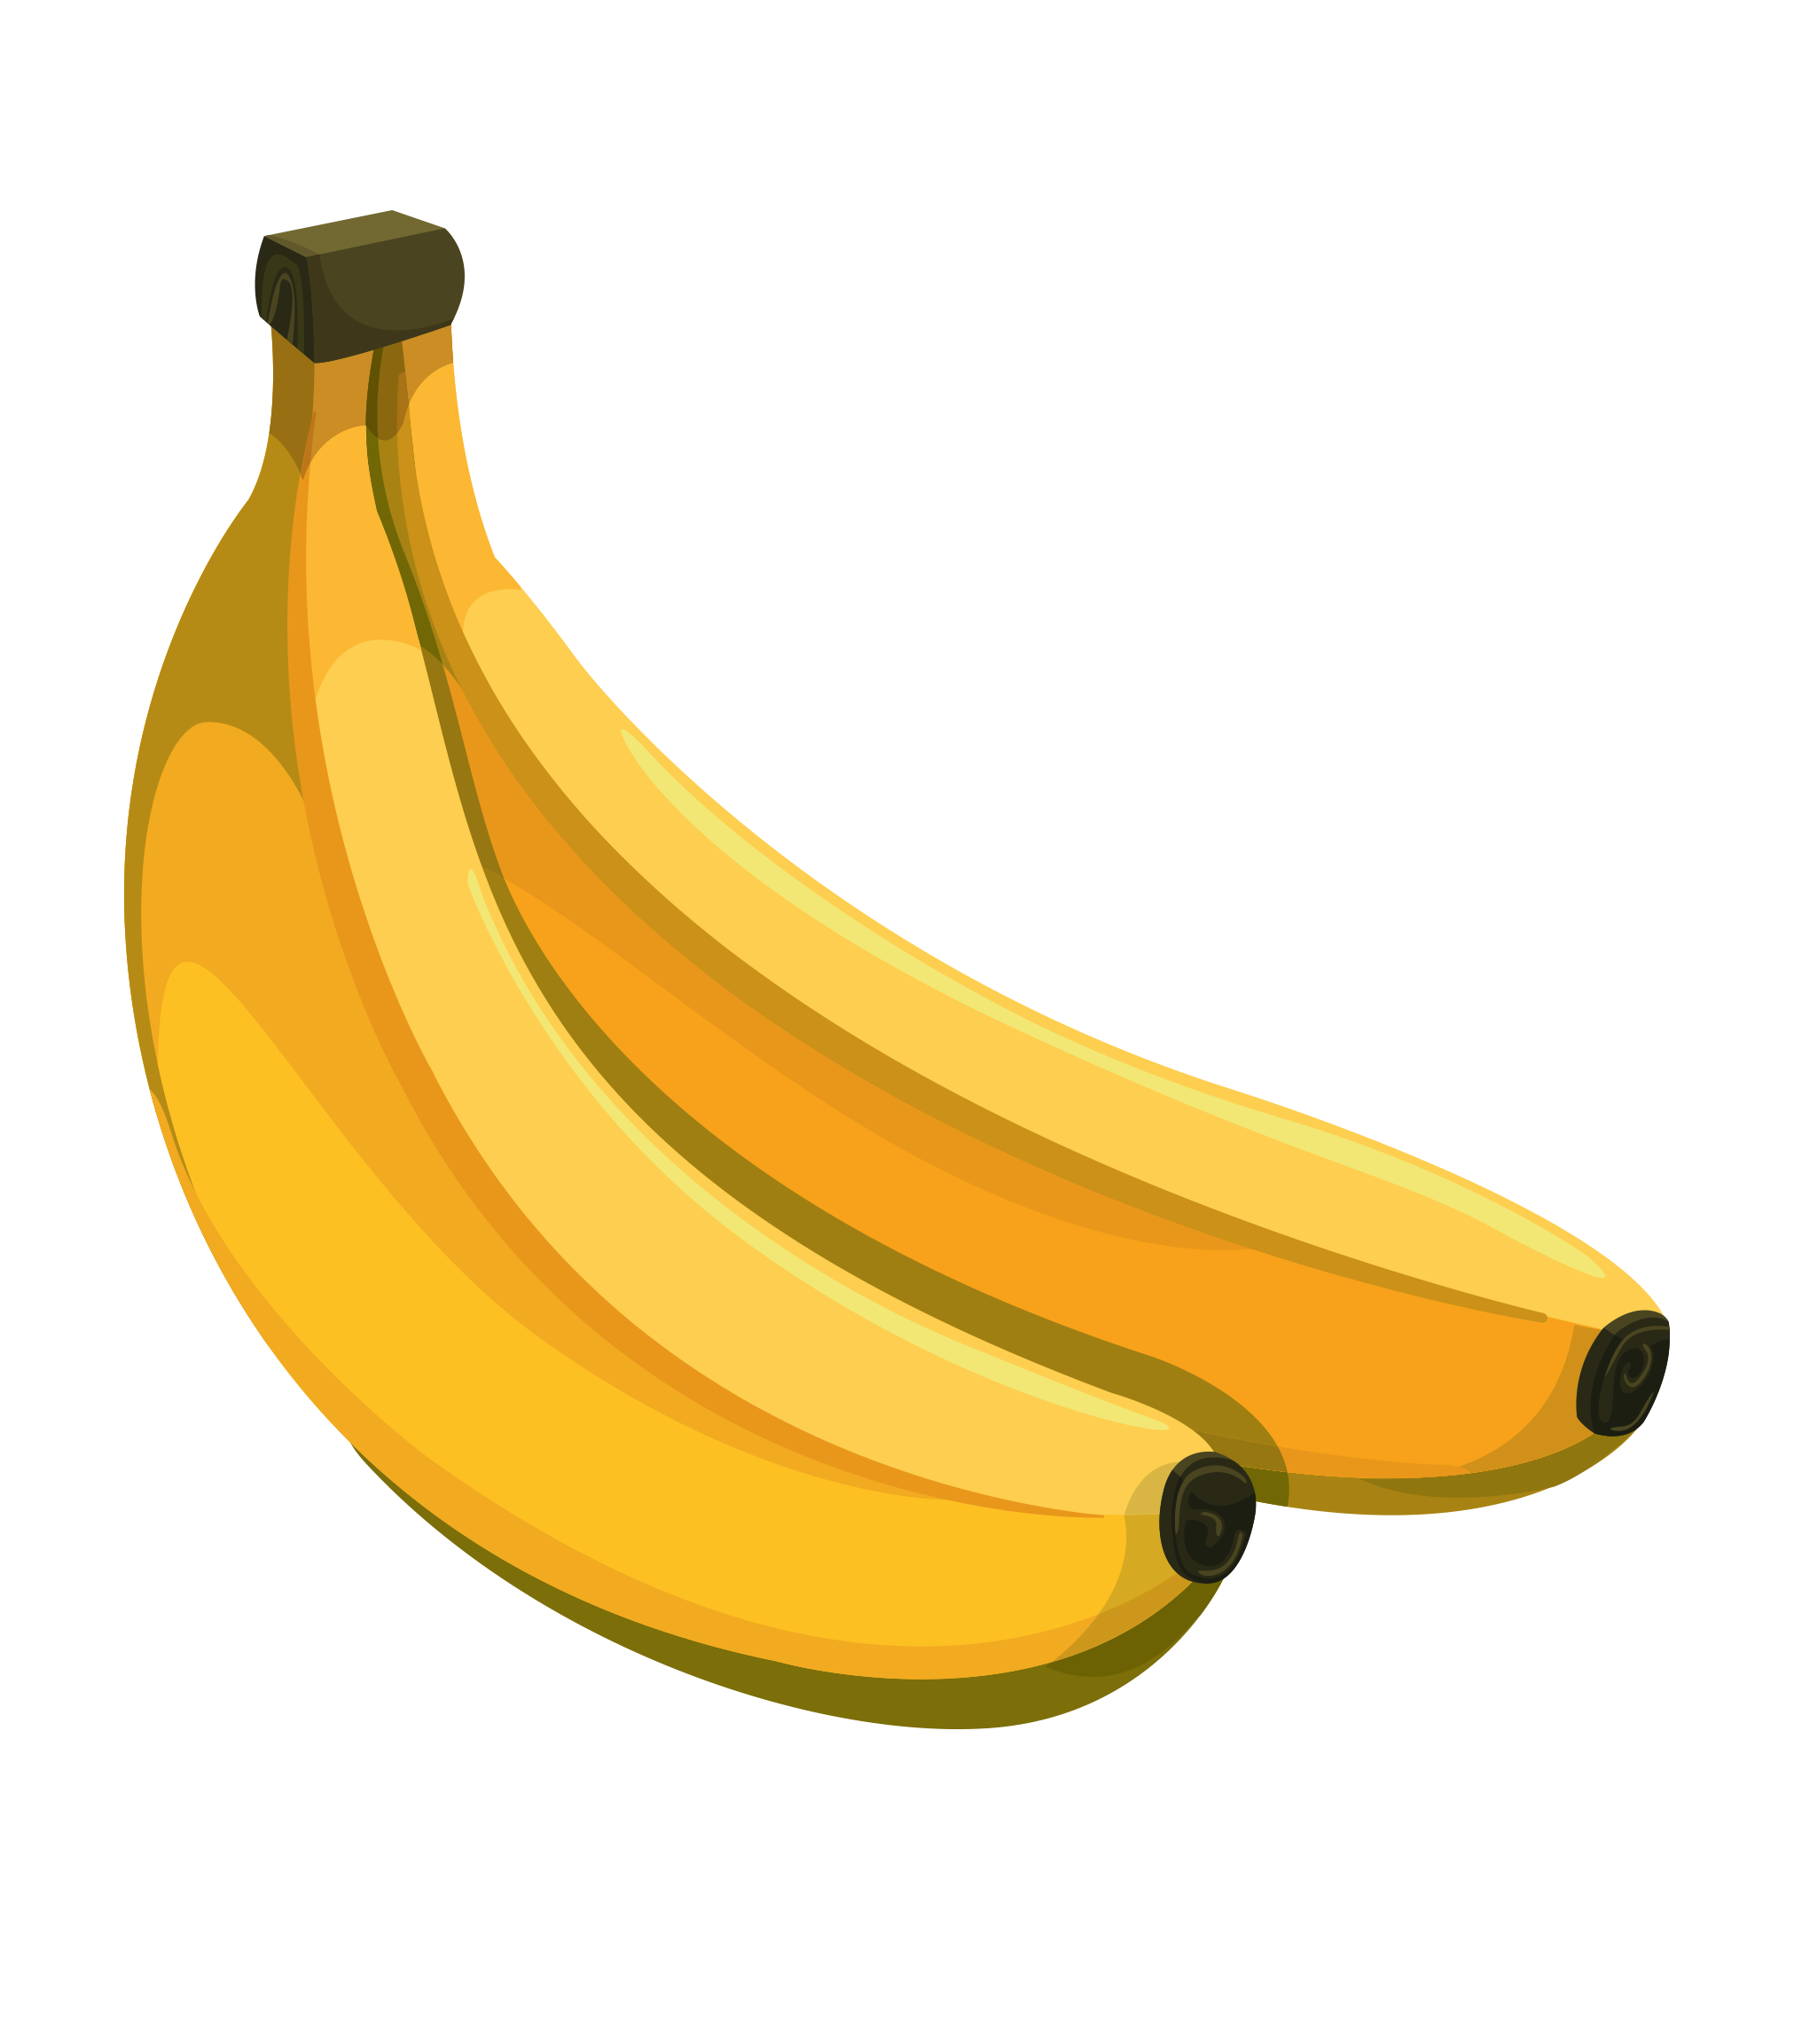 For free download images. Banana clipart